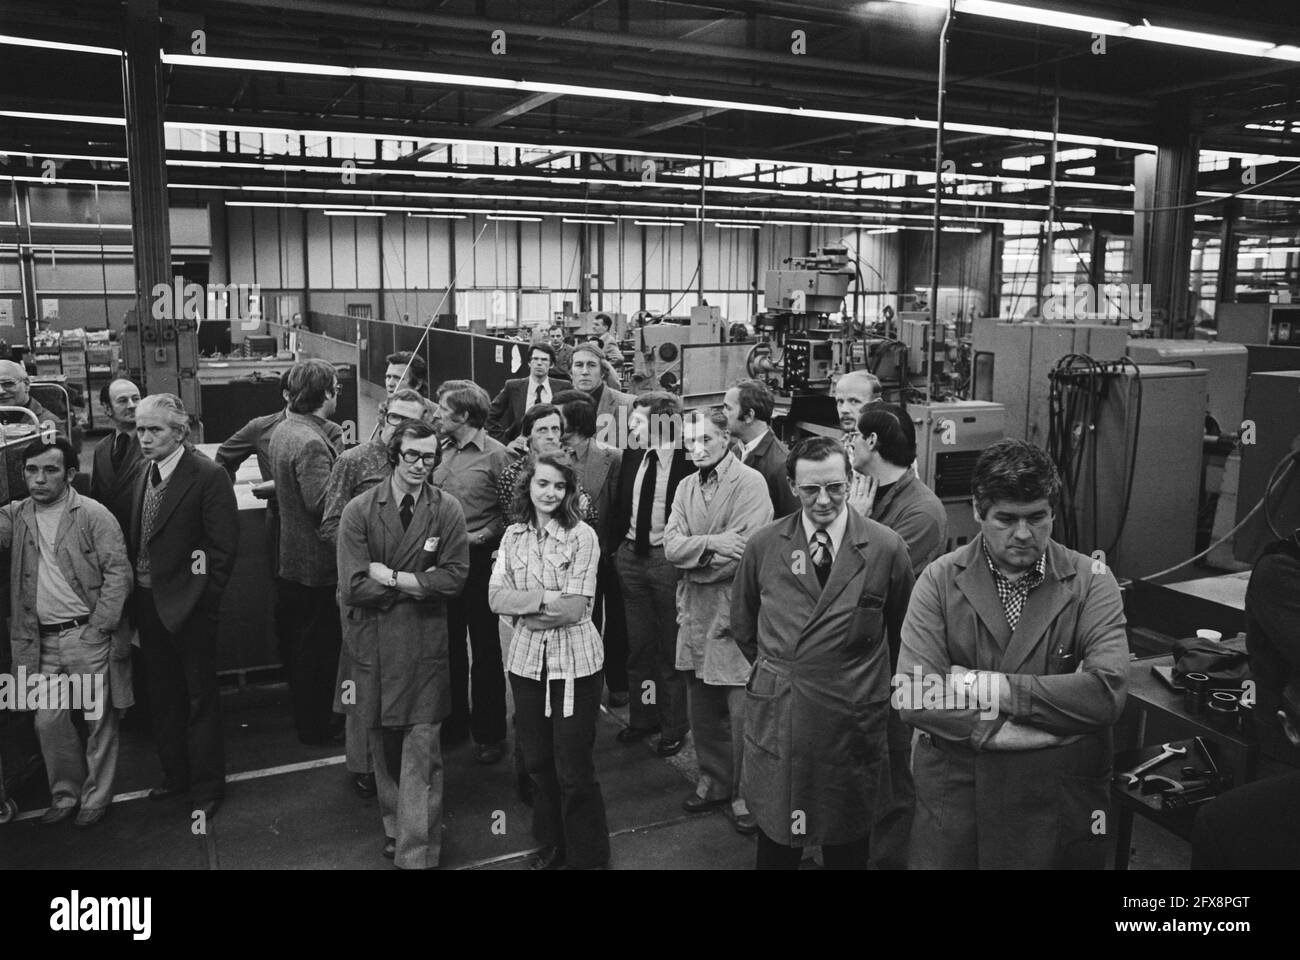 Occupation Tealtronic; workers during meeting in the factory hall, January 10, 1977, CONSTITUTION, EMPLOYEES, meetings, The Netherlands, 20th century press agency photo, news to remember, documentary, historic photography 1945-1990, visual stories, human history of the Twentieth Century, capturing moments in time Stock Photo